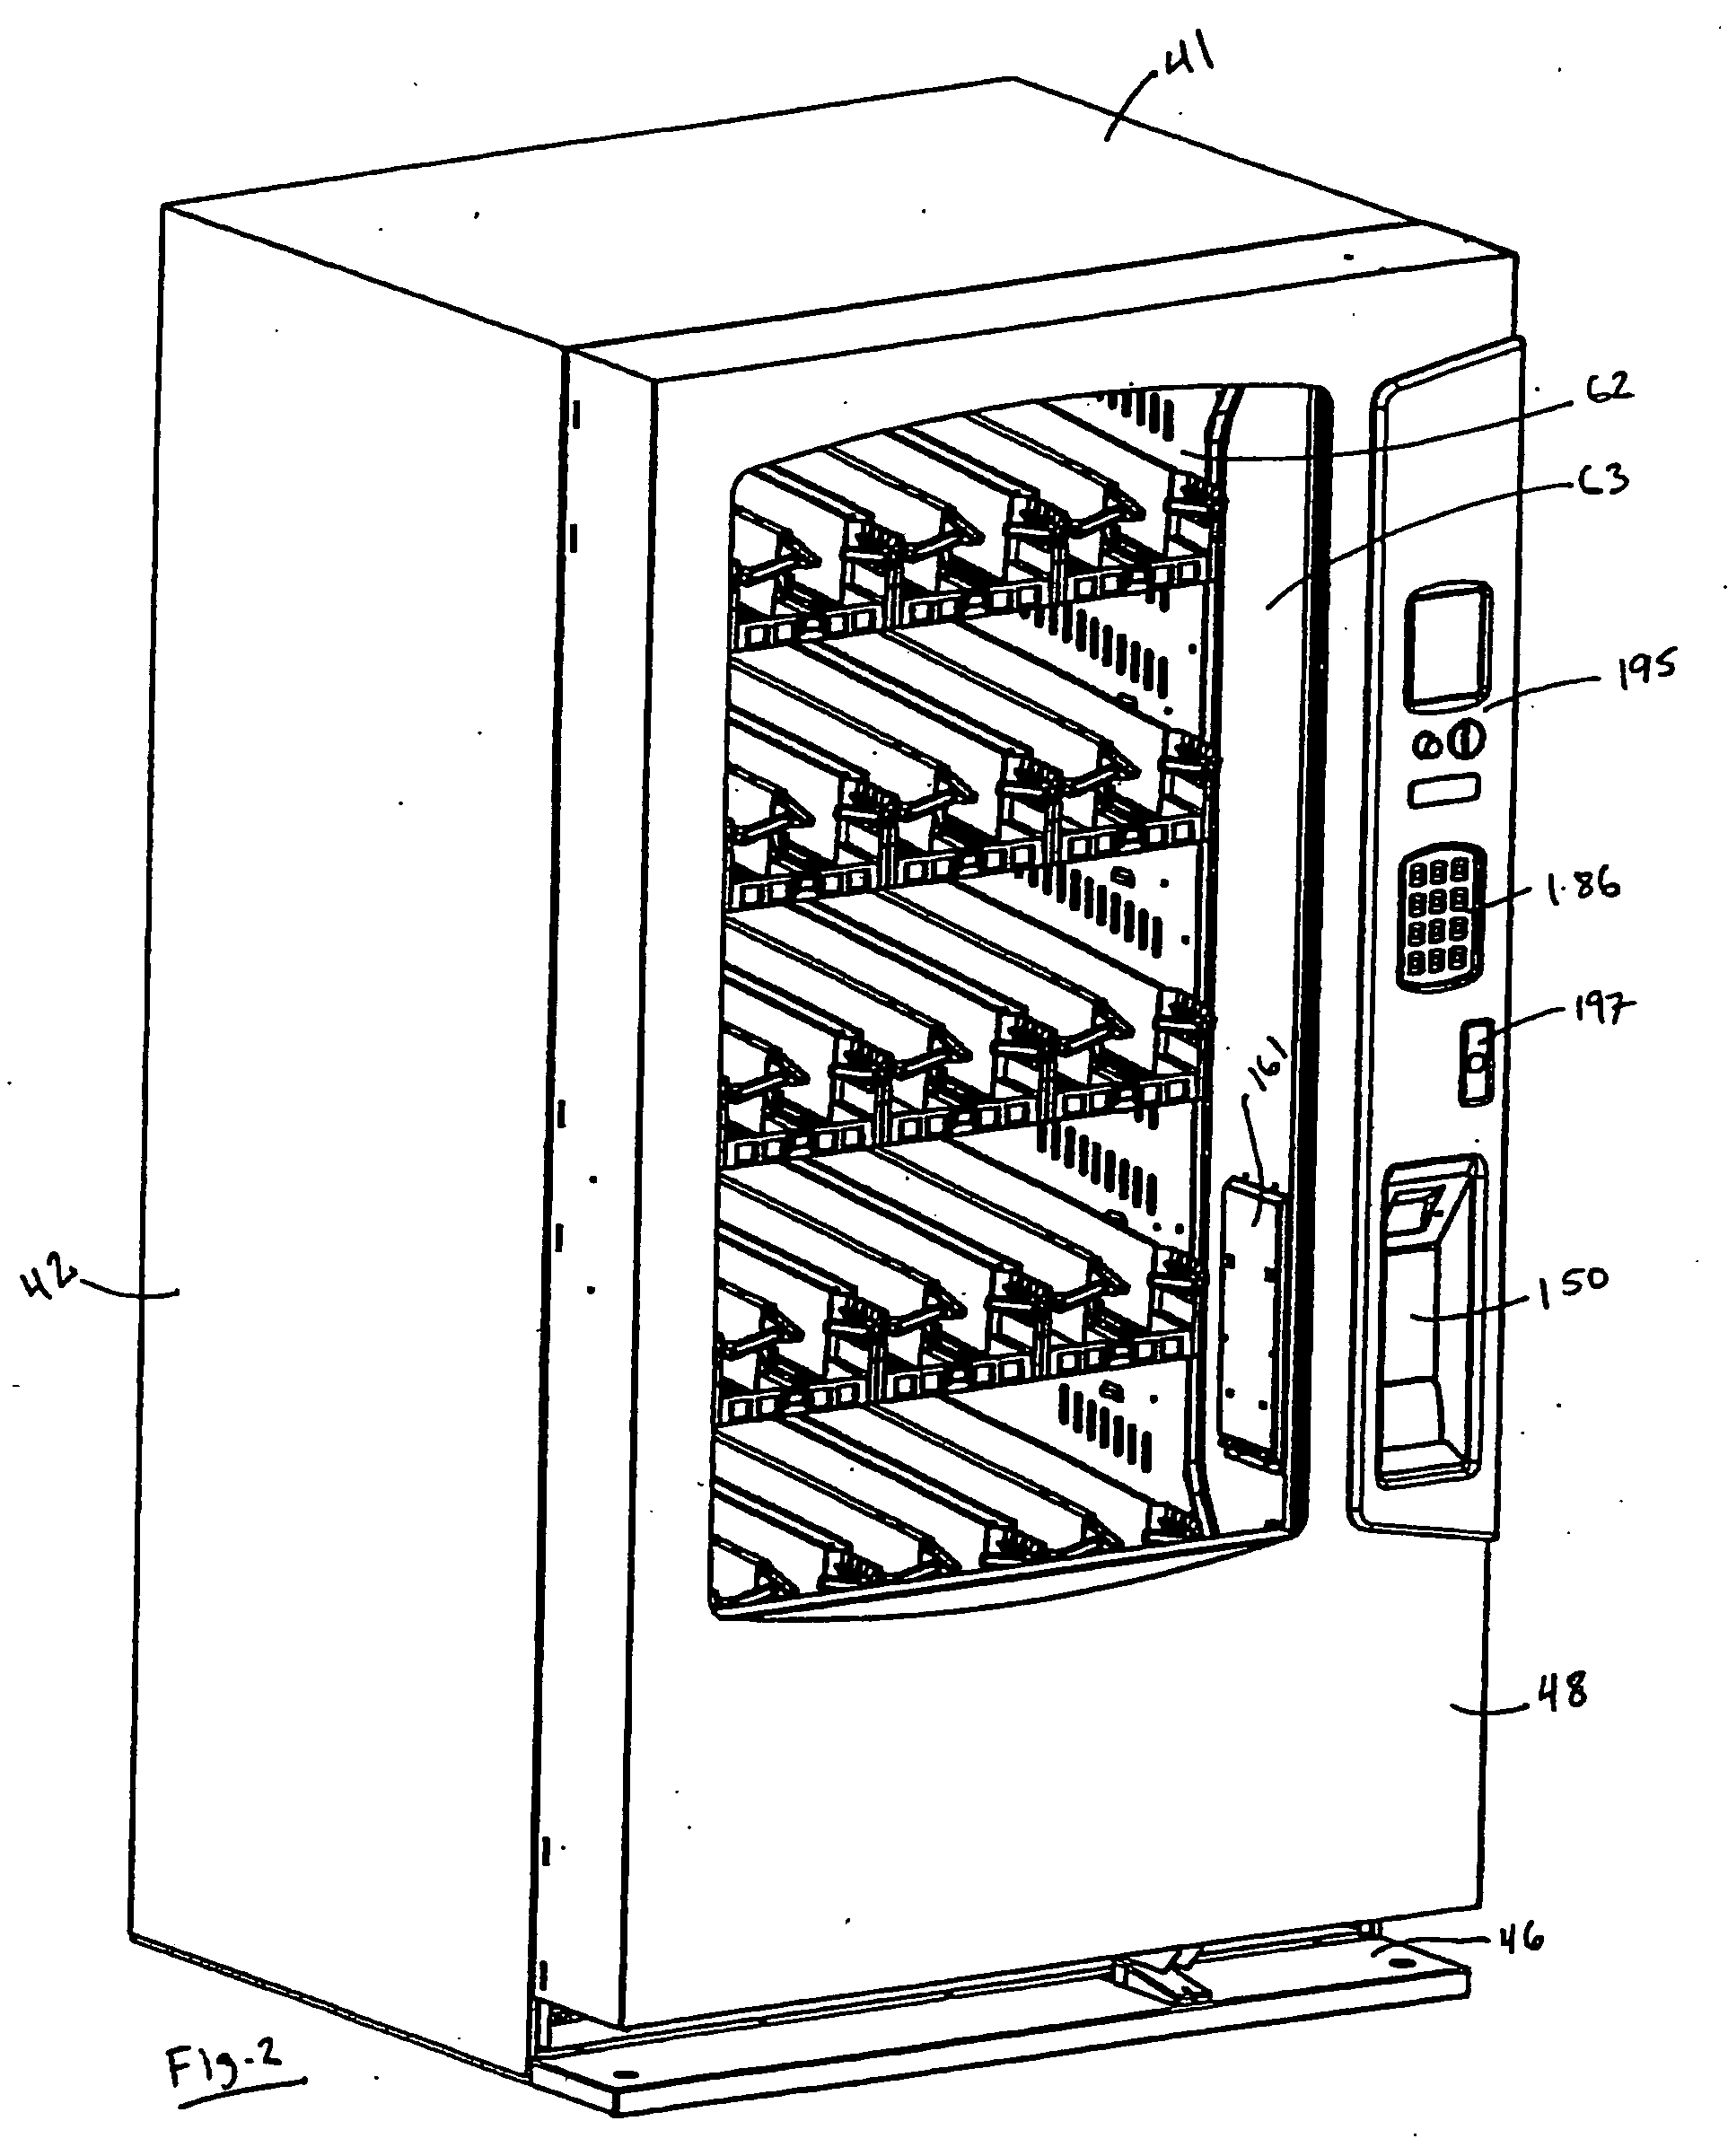 Product acquisition devices and methods for vending machines